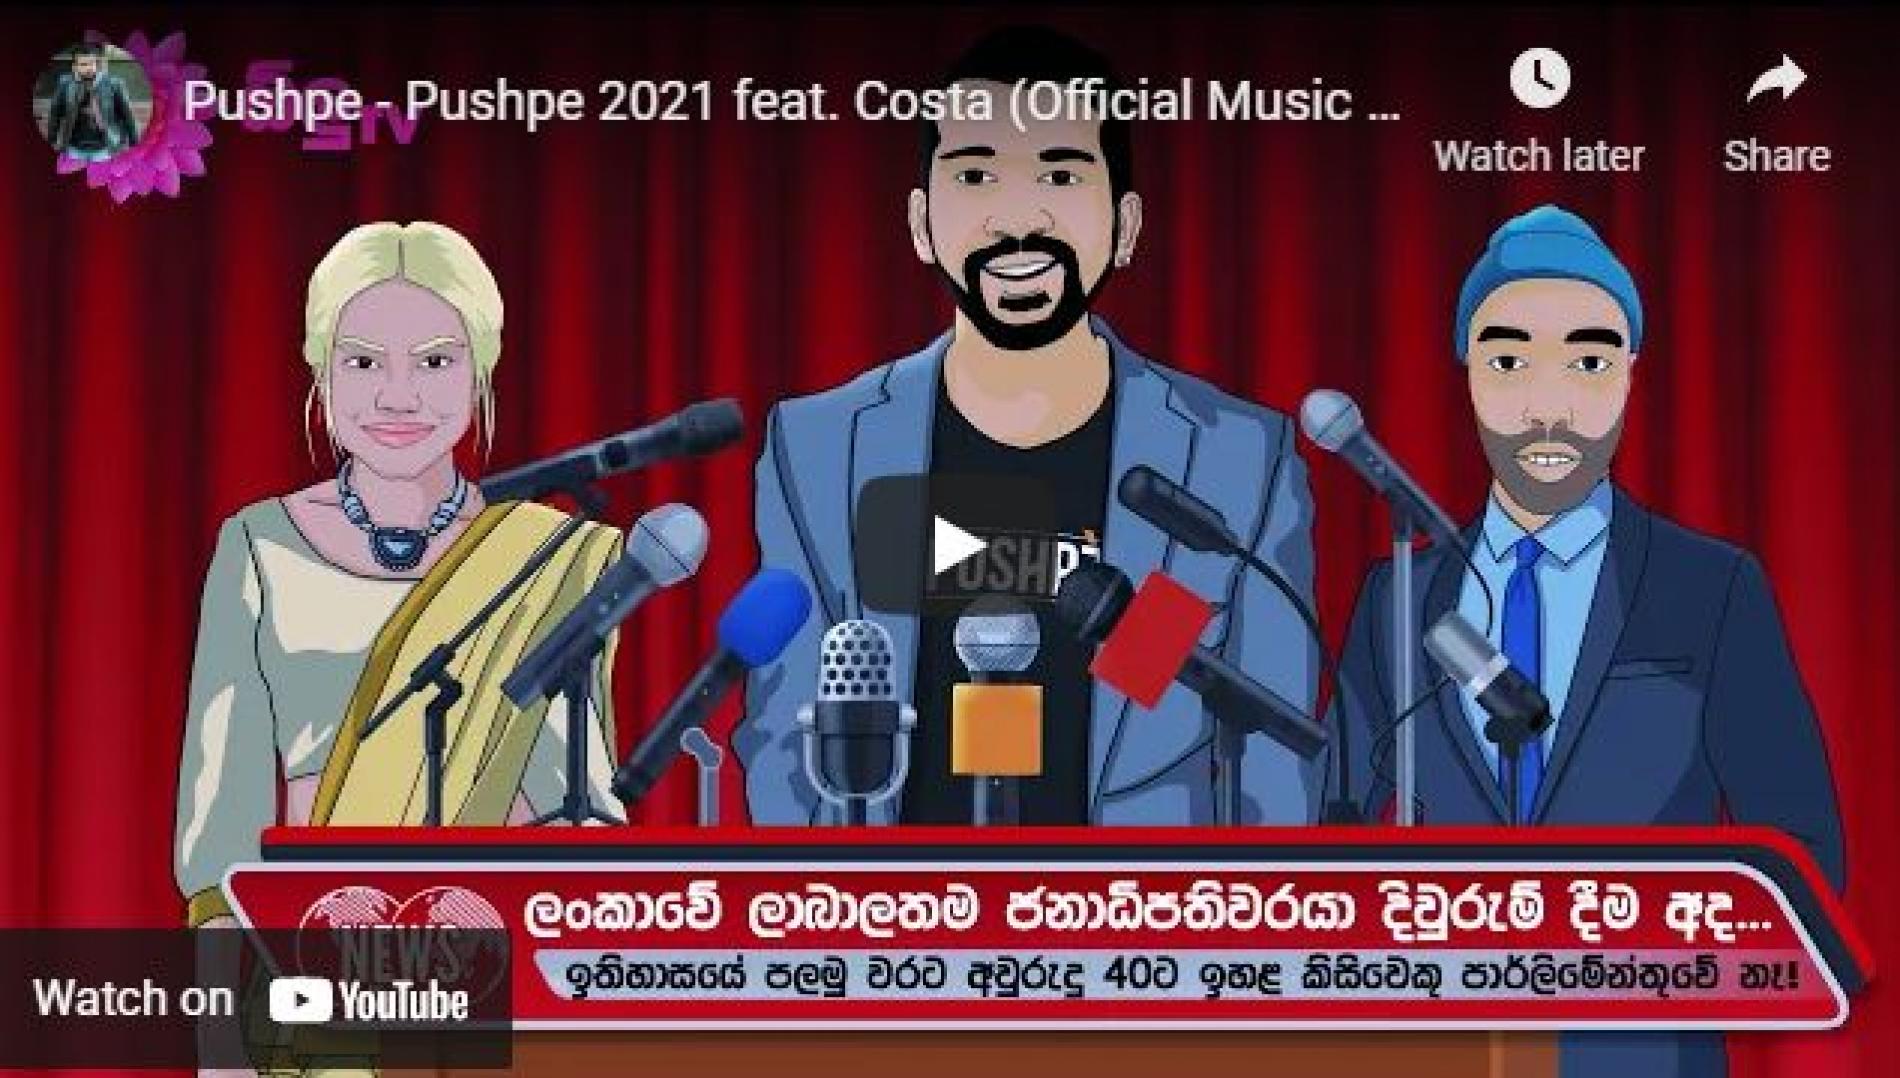 New Music : Pushpe – Pushpe 2021 feat Costa (Official Music Video)